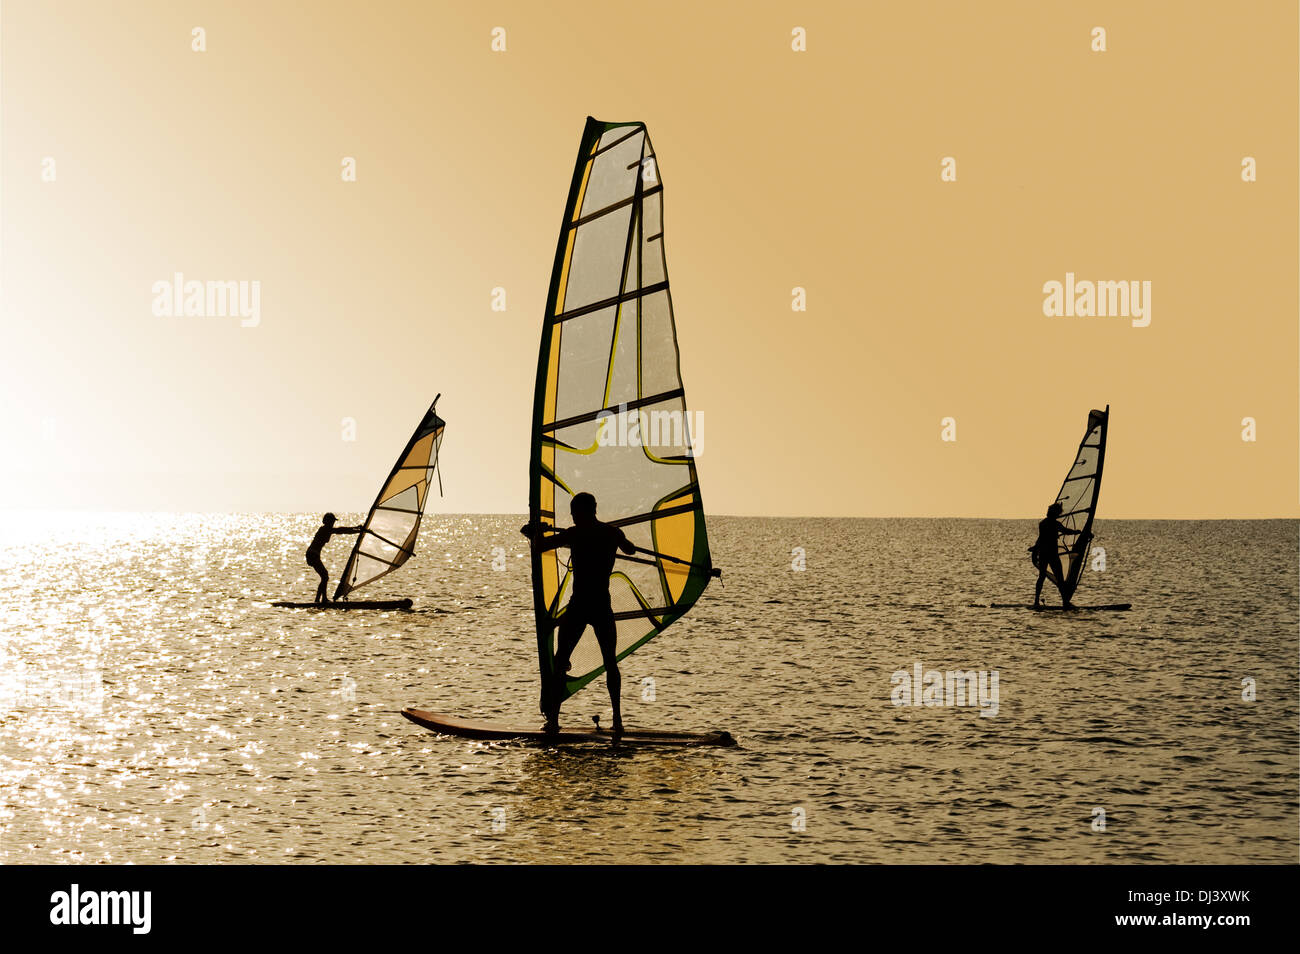 Silhouettes of three windsurfers on waves of a gulf Stock Photo